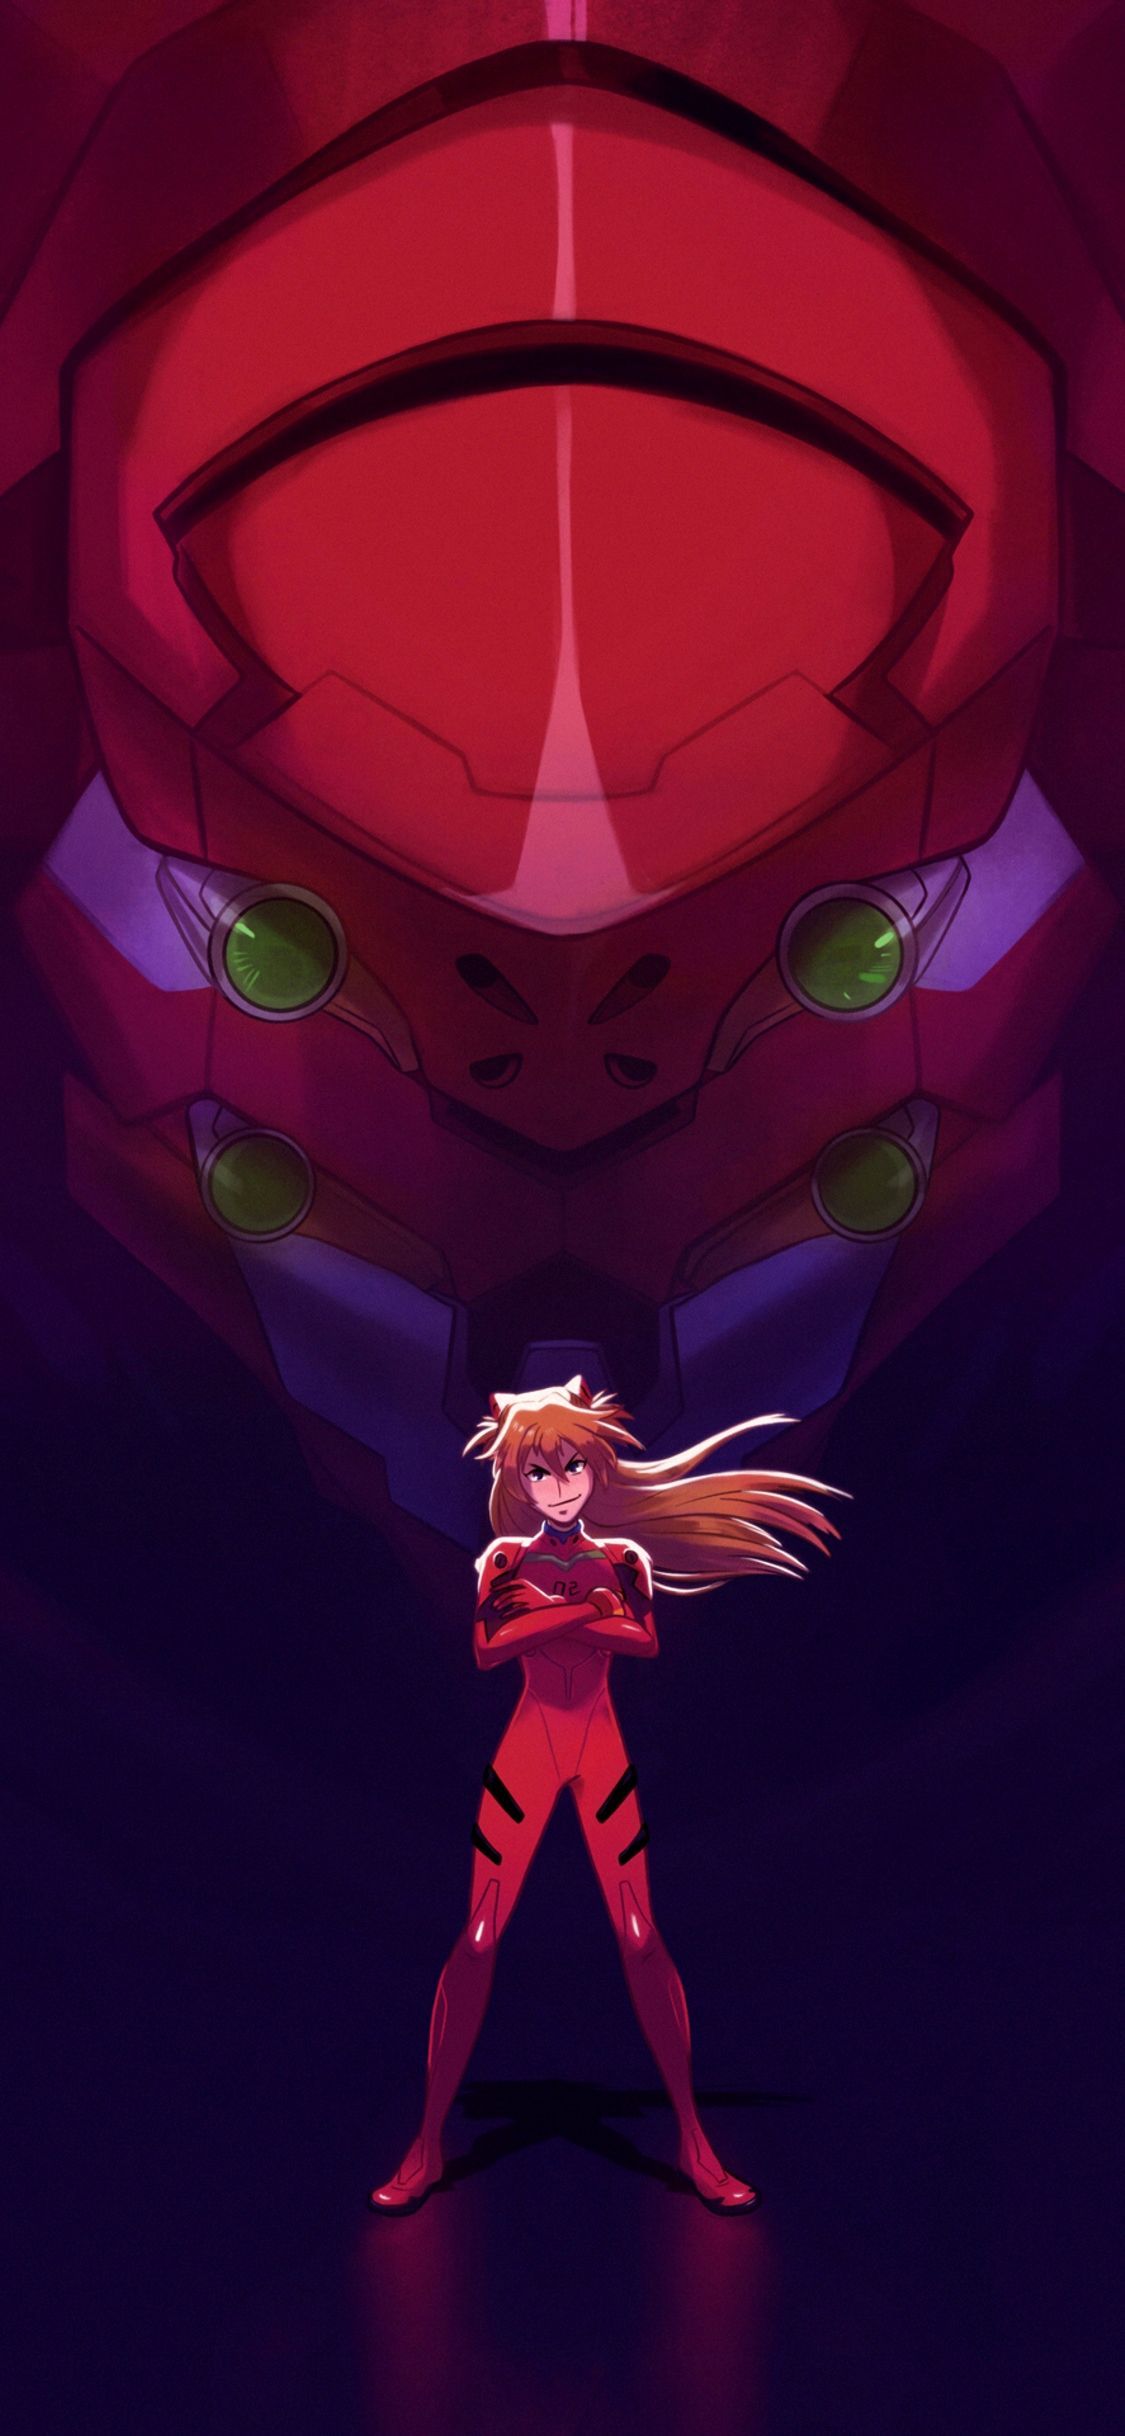 Asuka And Her Unit 02 From Evangelion iPhone Xs